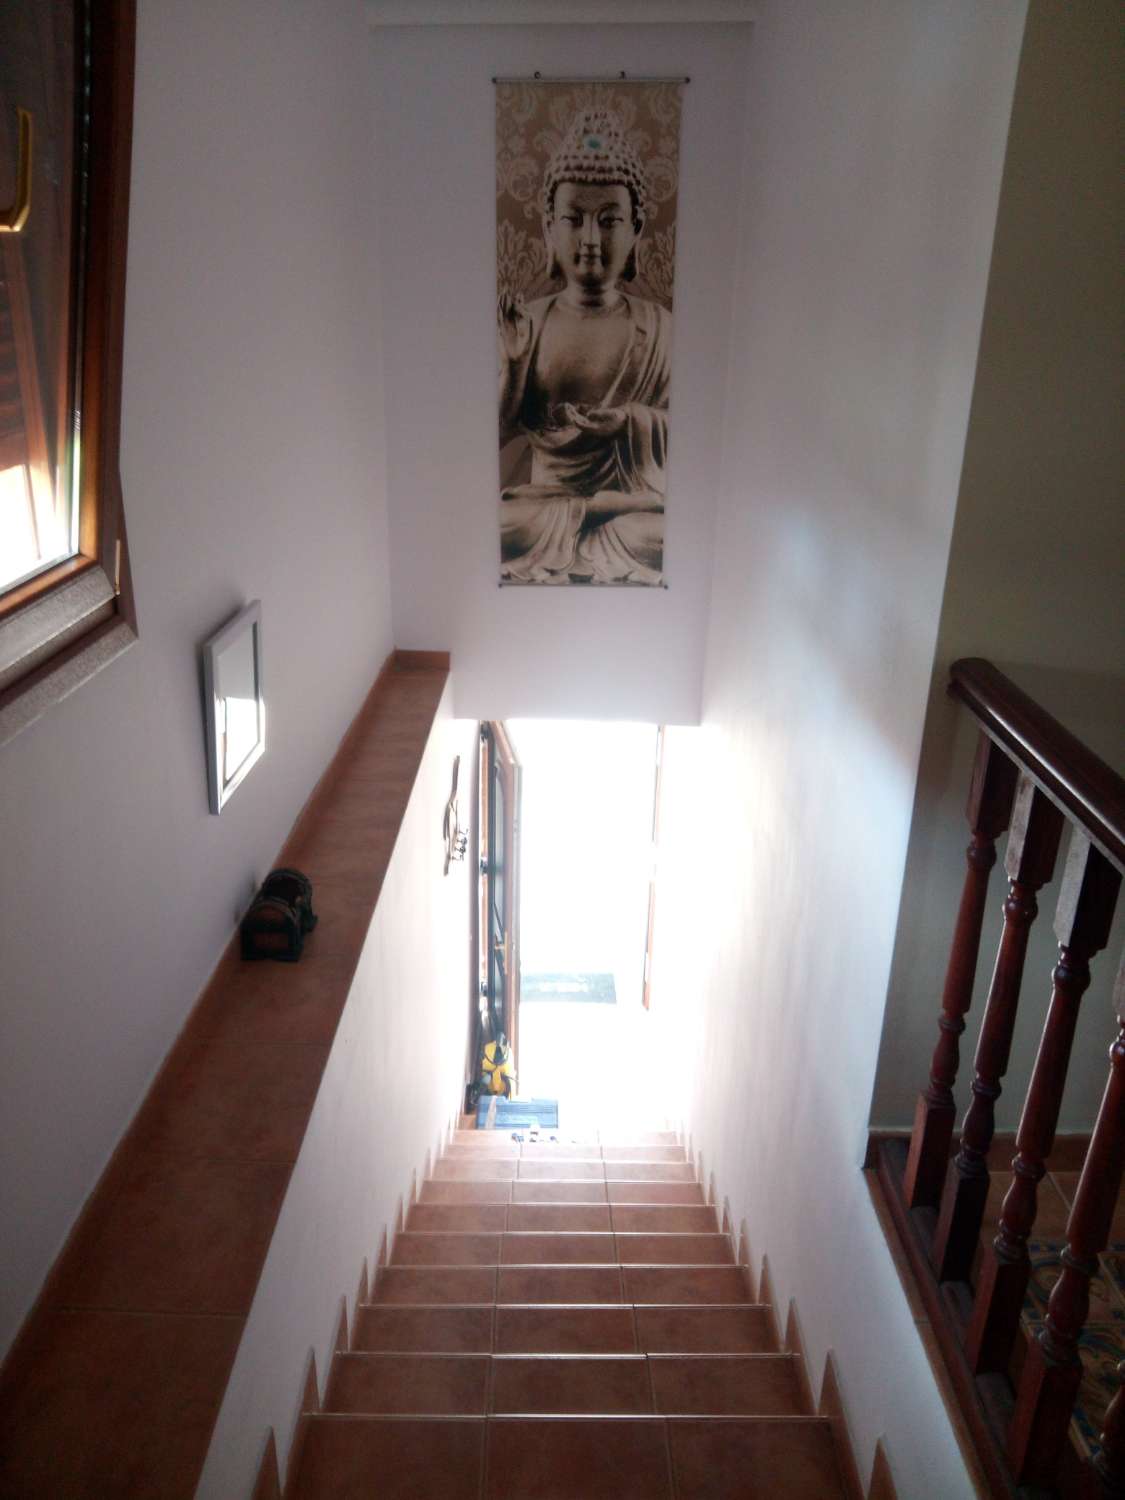 House for rent in Castro-Urdiales